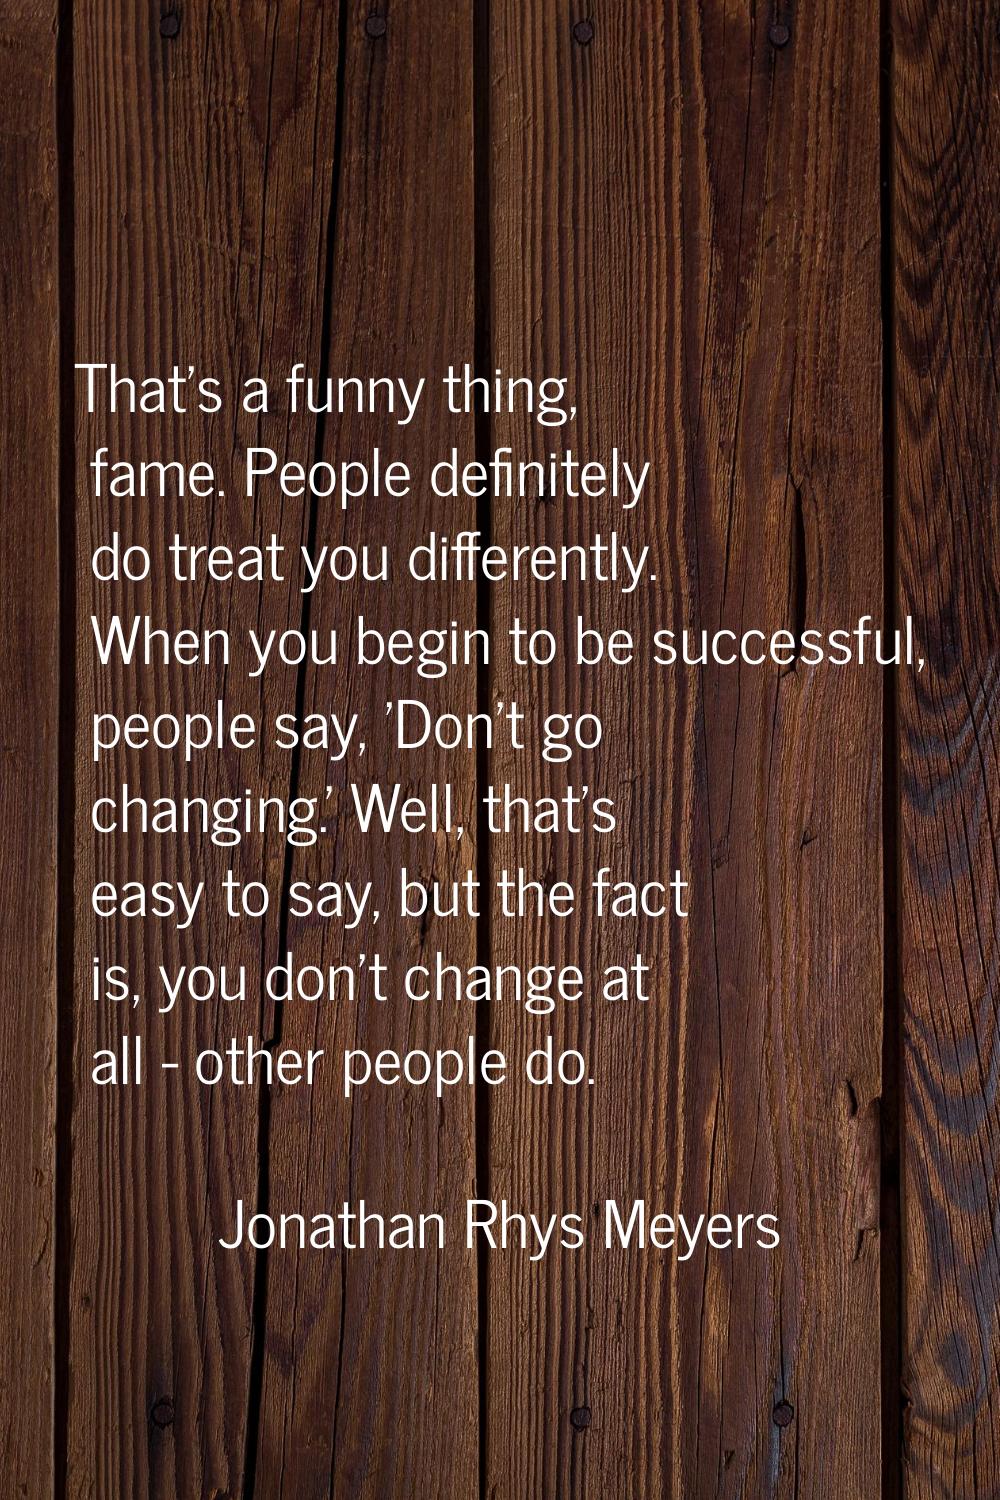 That's a funny thing, fame. People definitely do treat you differently. When you begin to be succes